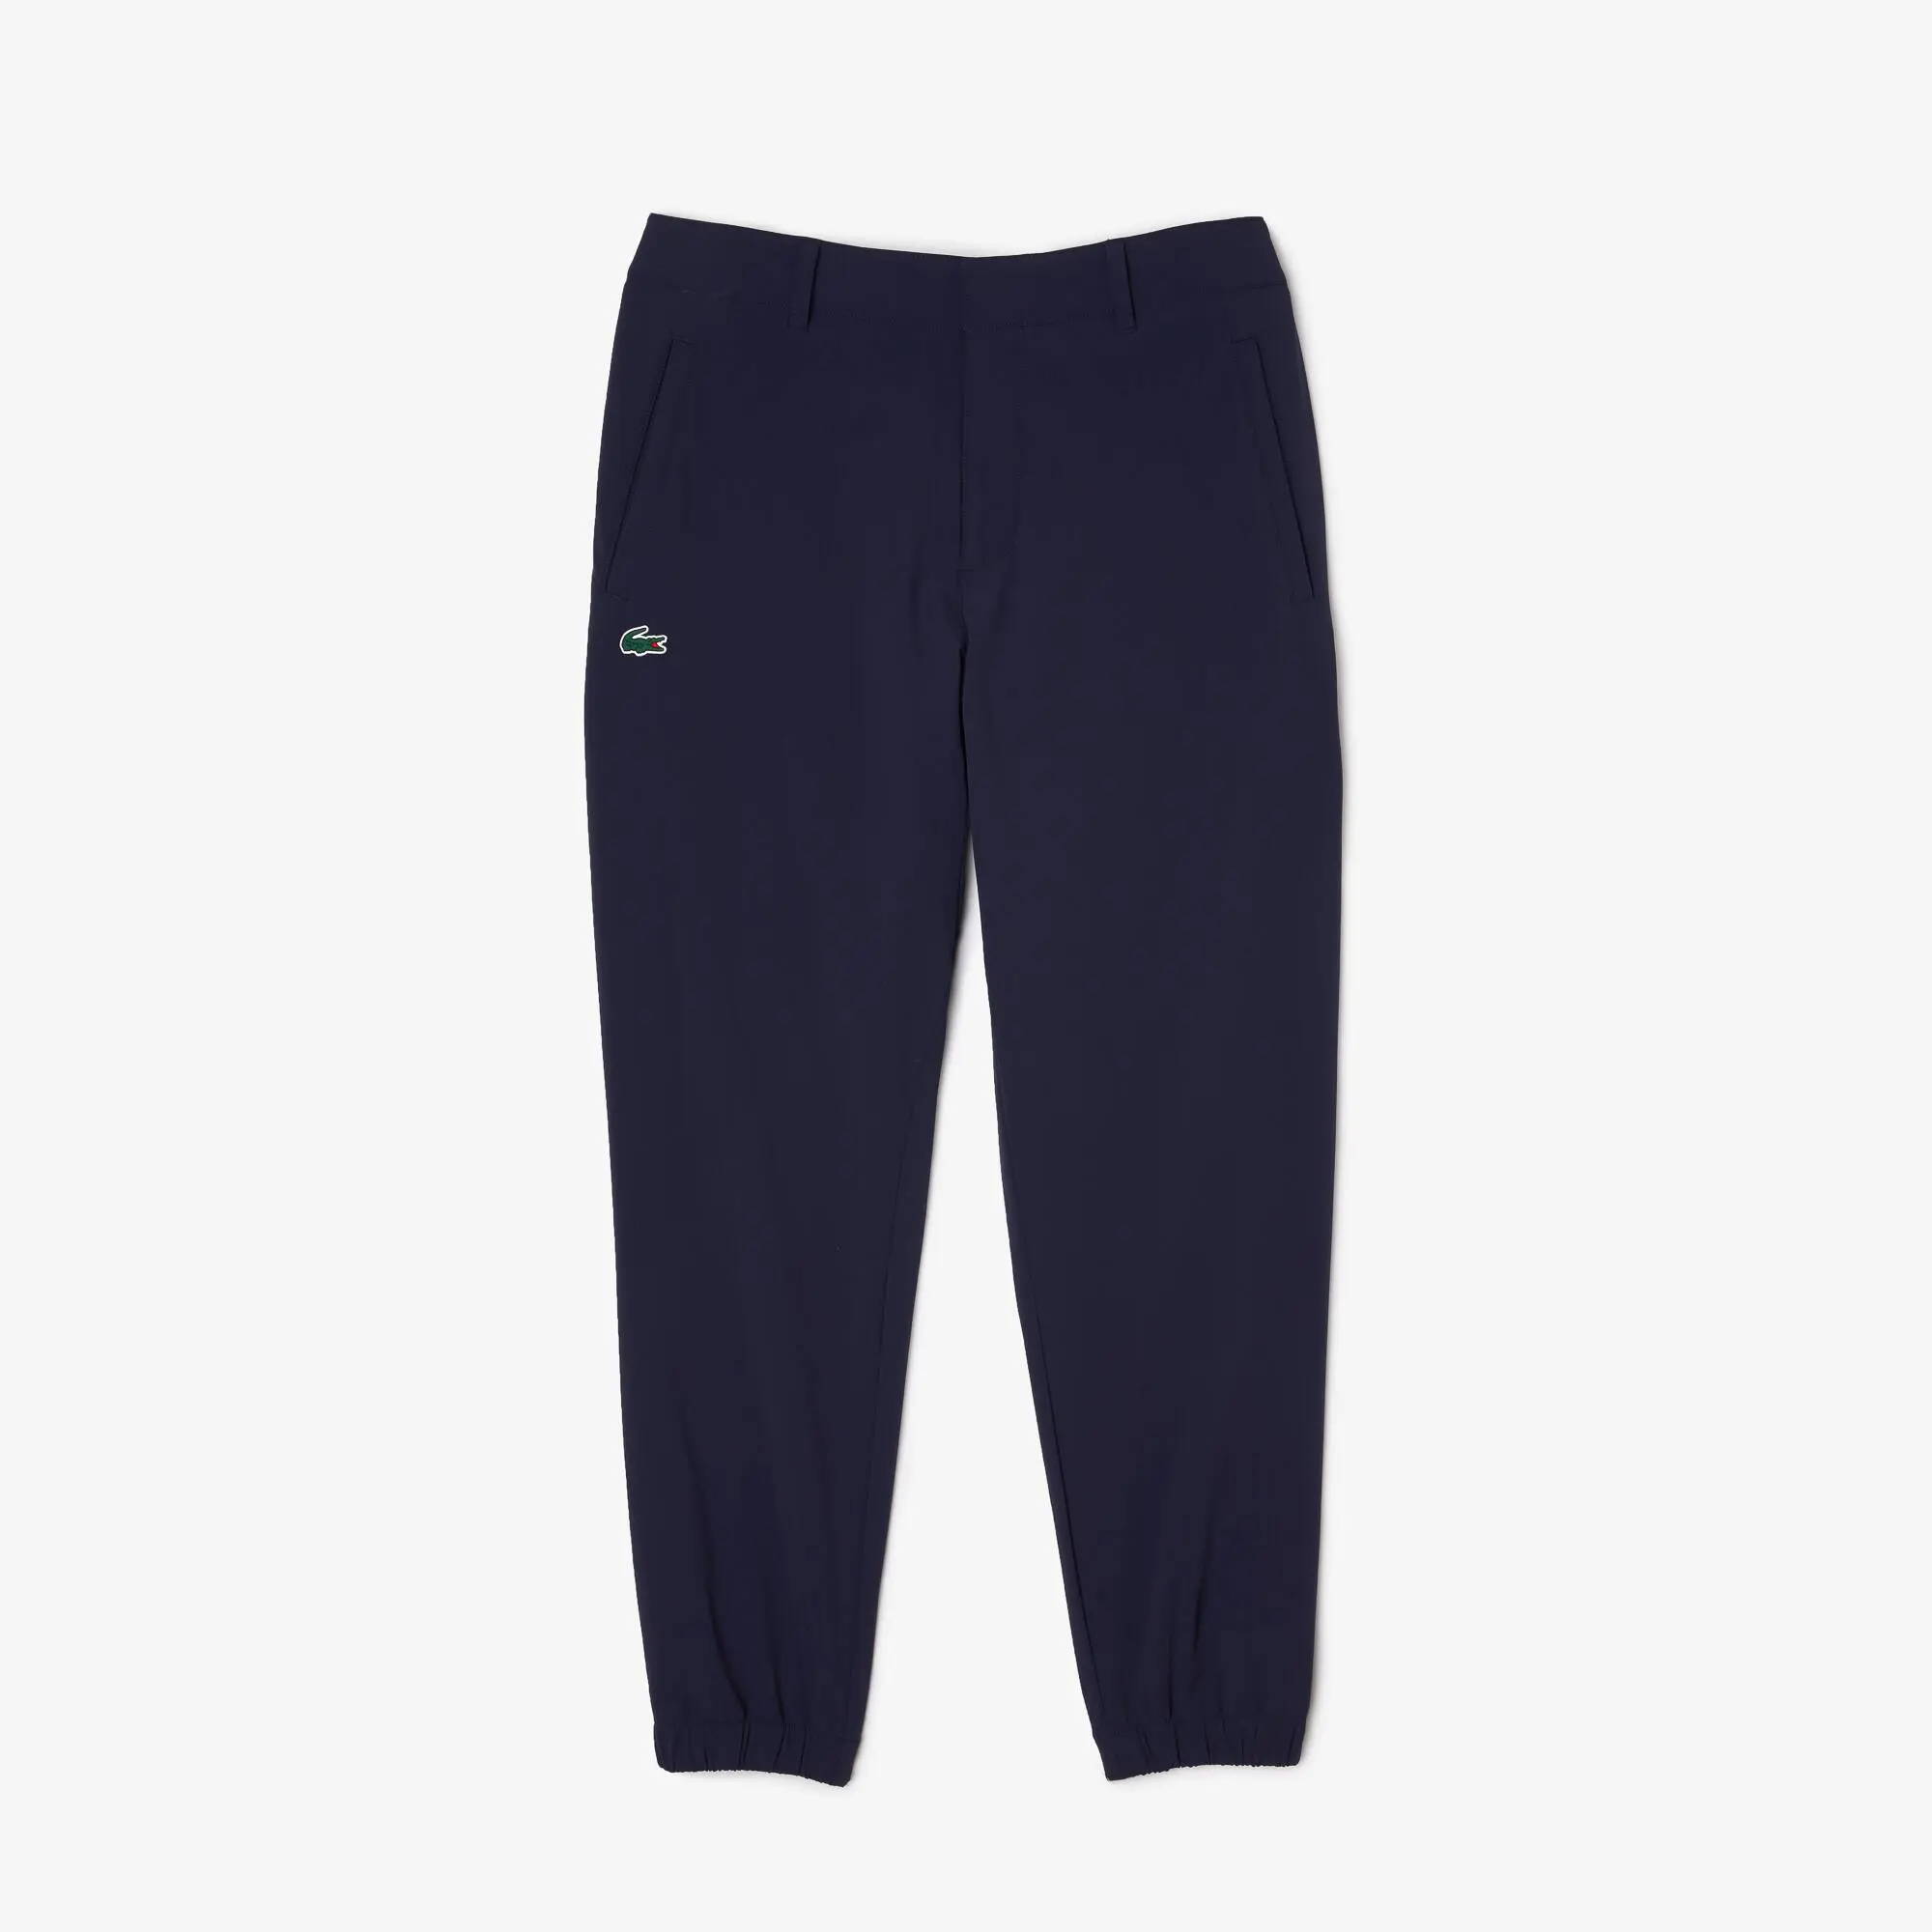 Lacoste Men’s Lacoste Golf Recycled Polyester Pants. 1